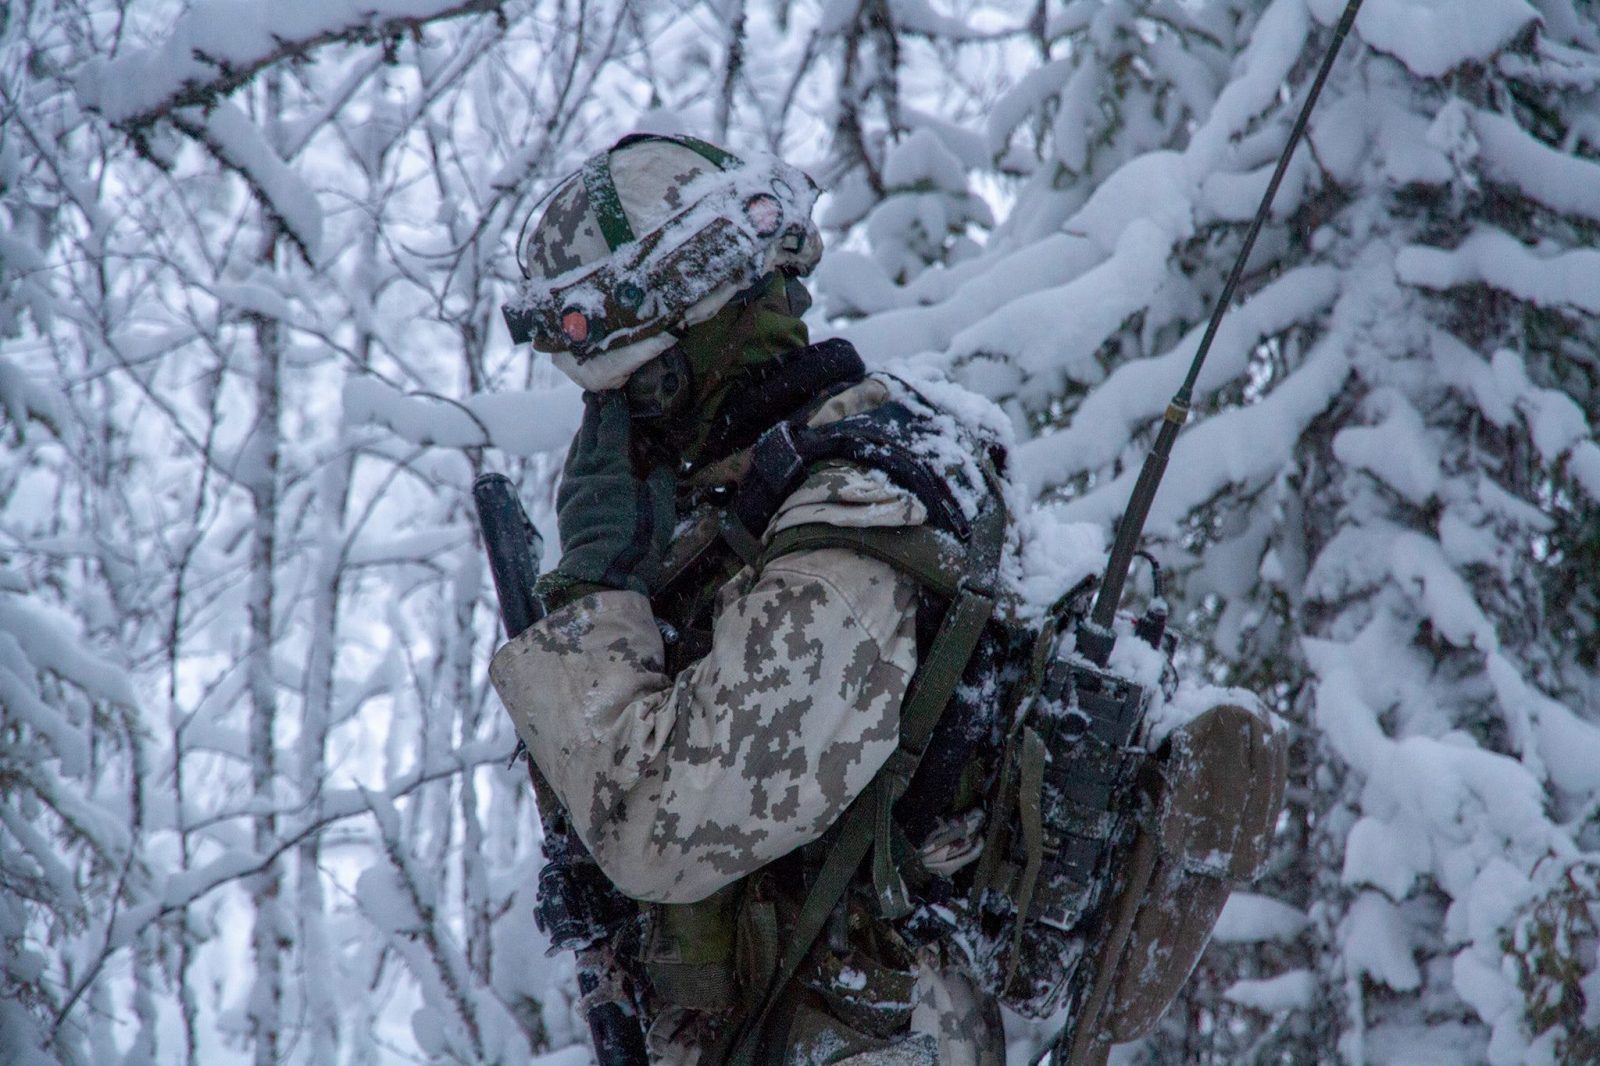 Army issues rules for winter weather gear and new camo